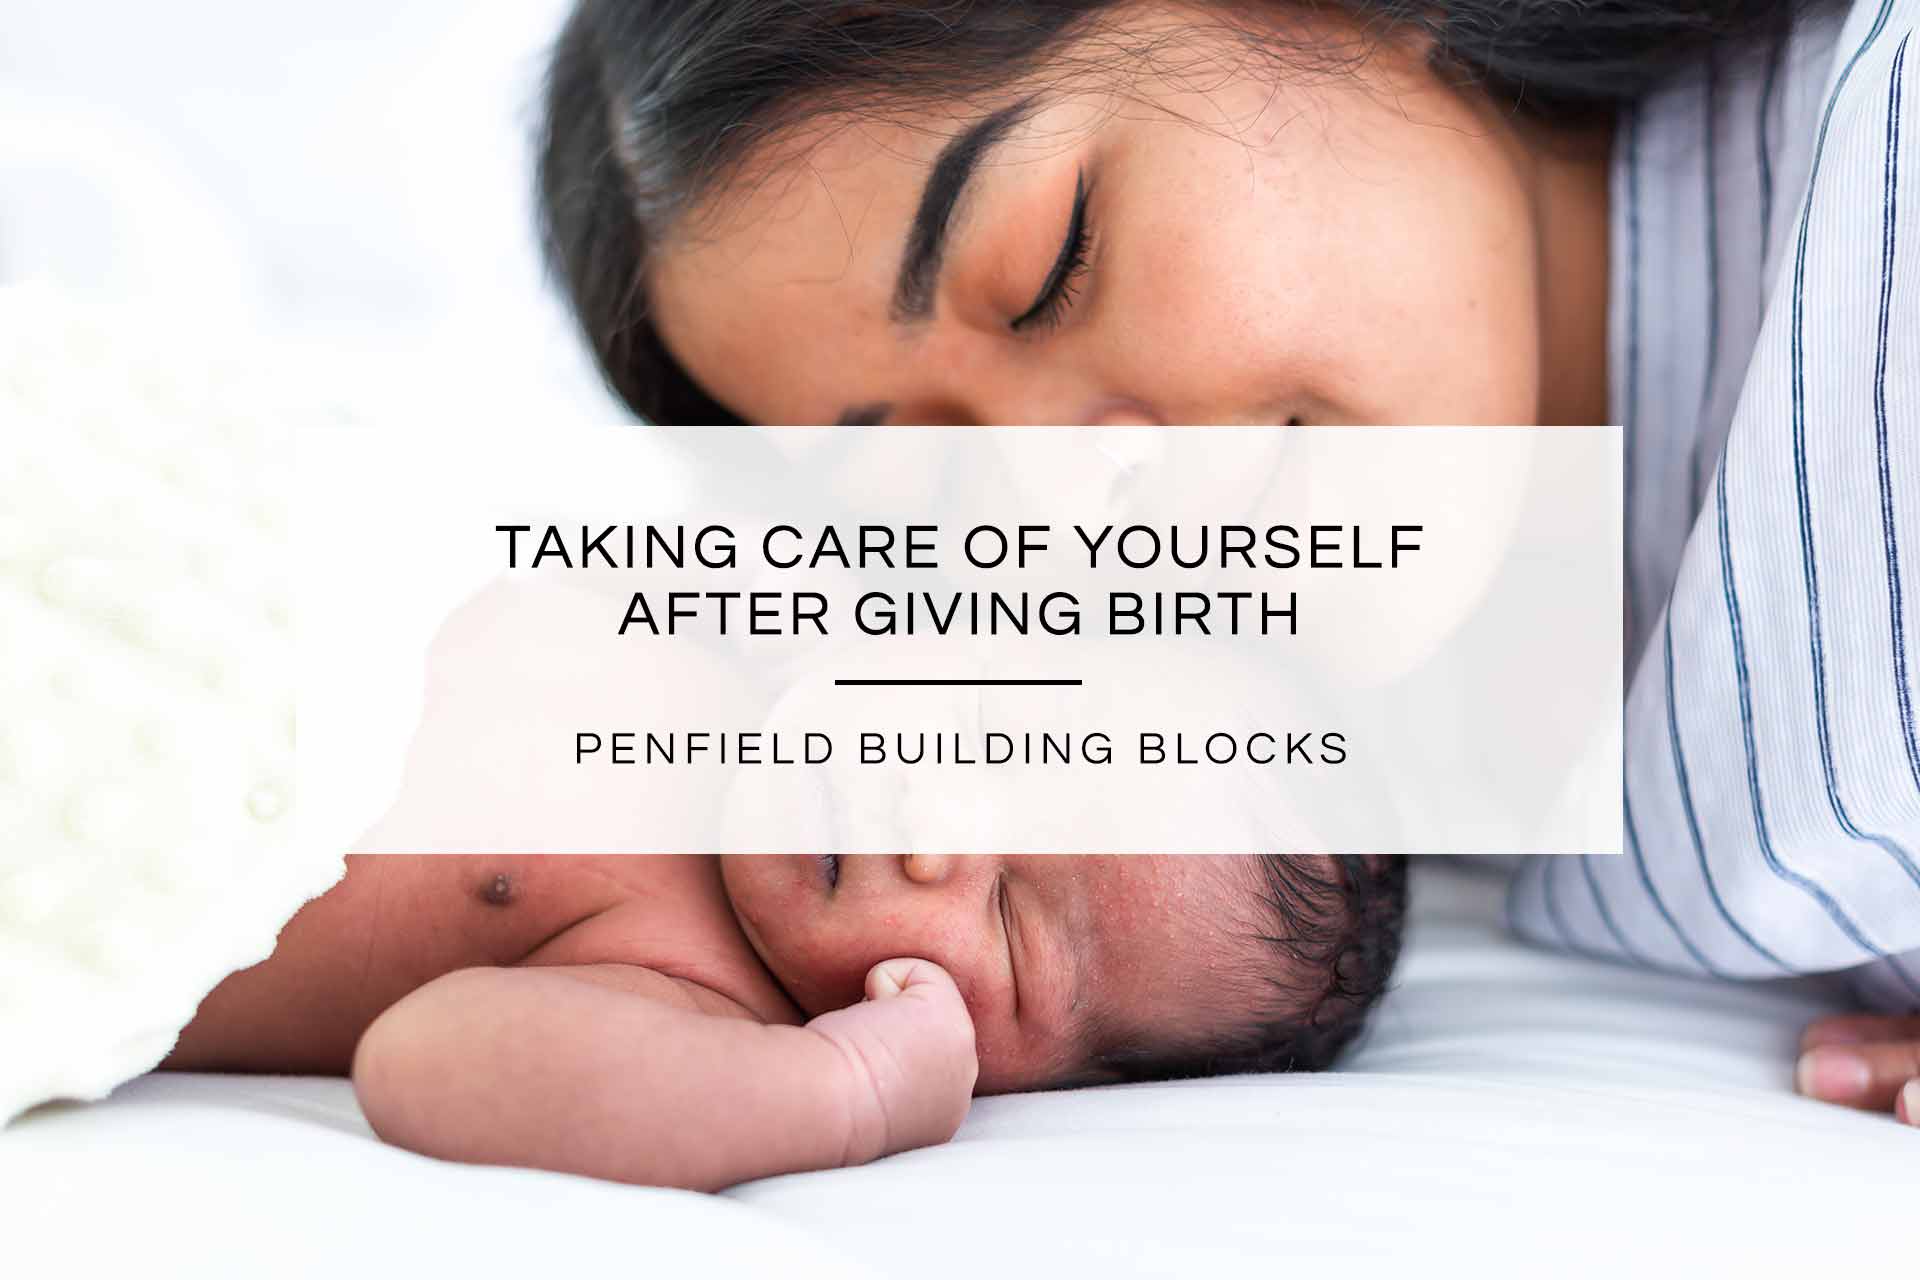 Taking Care of Yourself after Giving Birth - Advice from an Obstetric Laborist